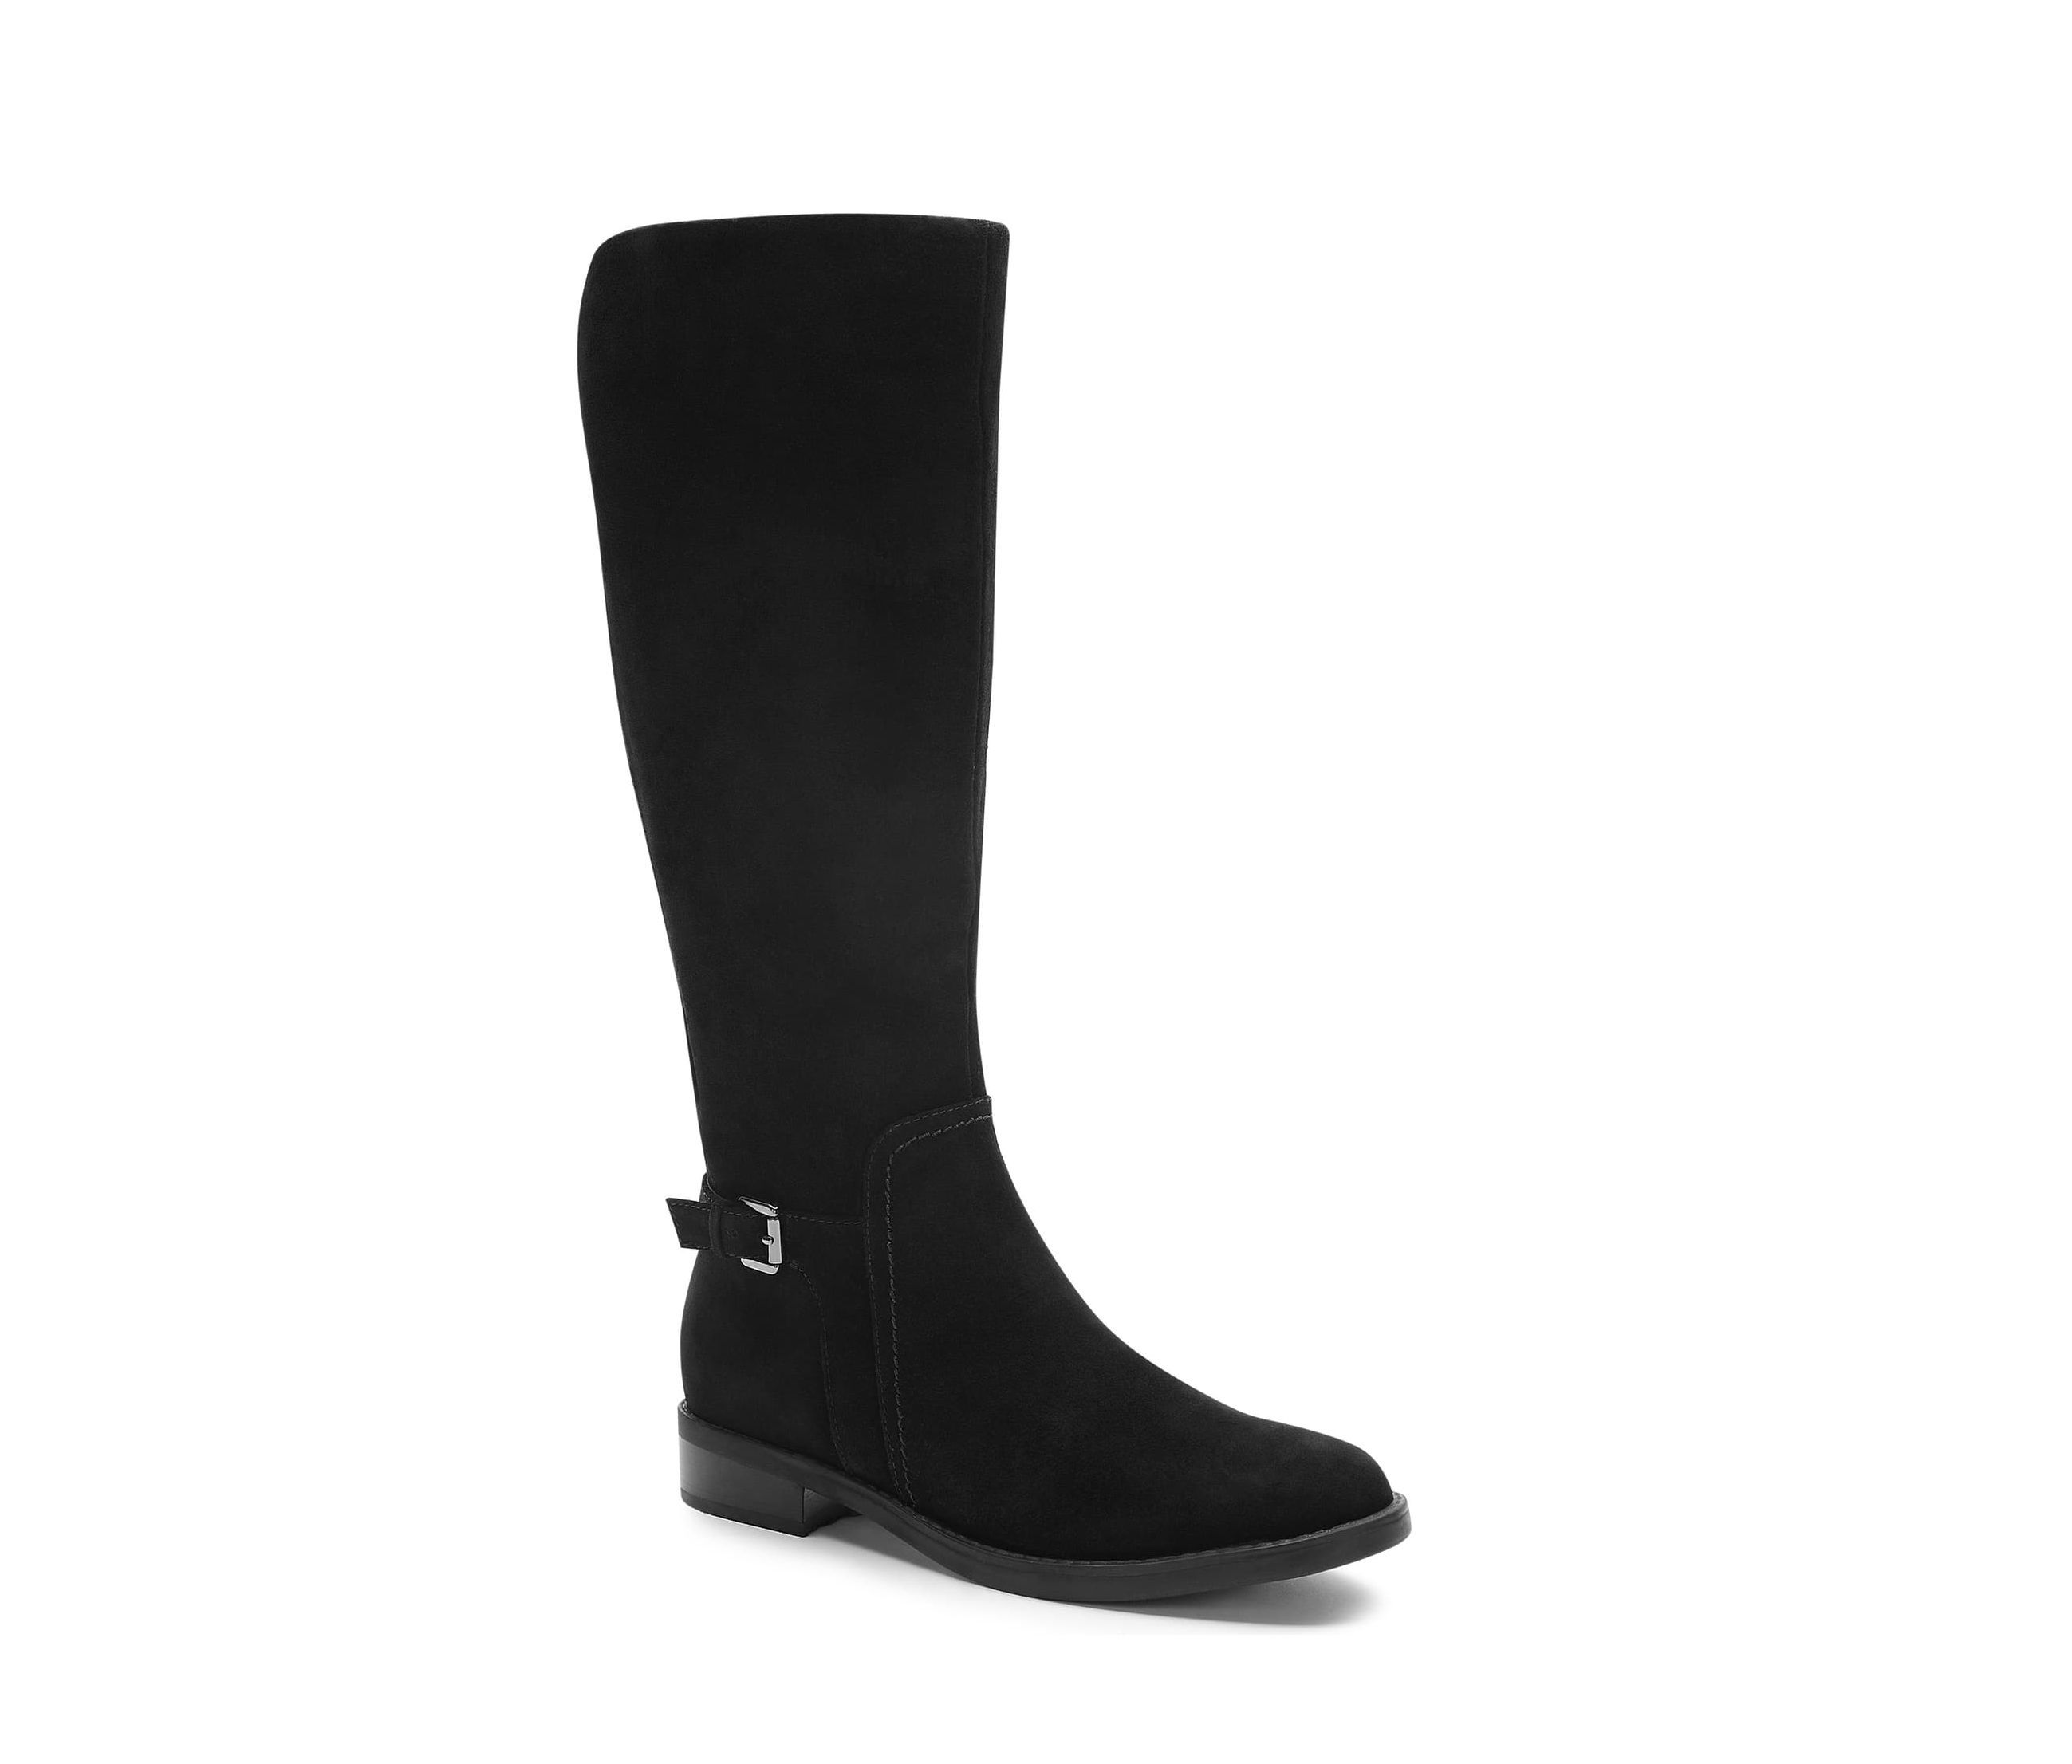 boots with high arch support